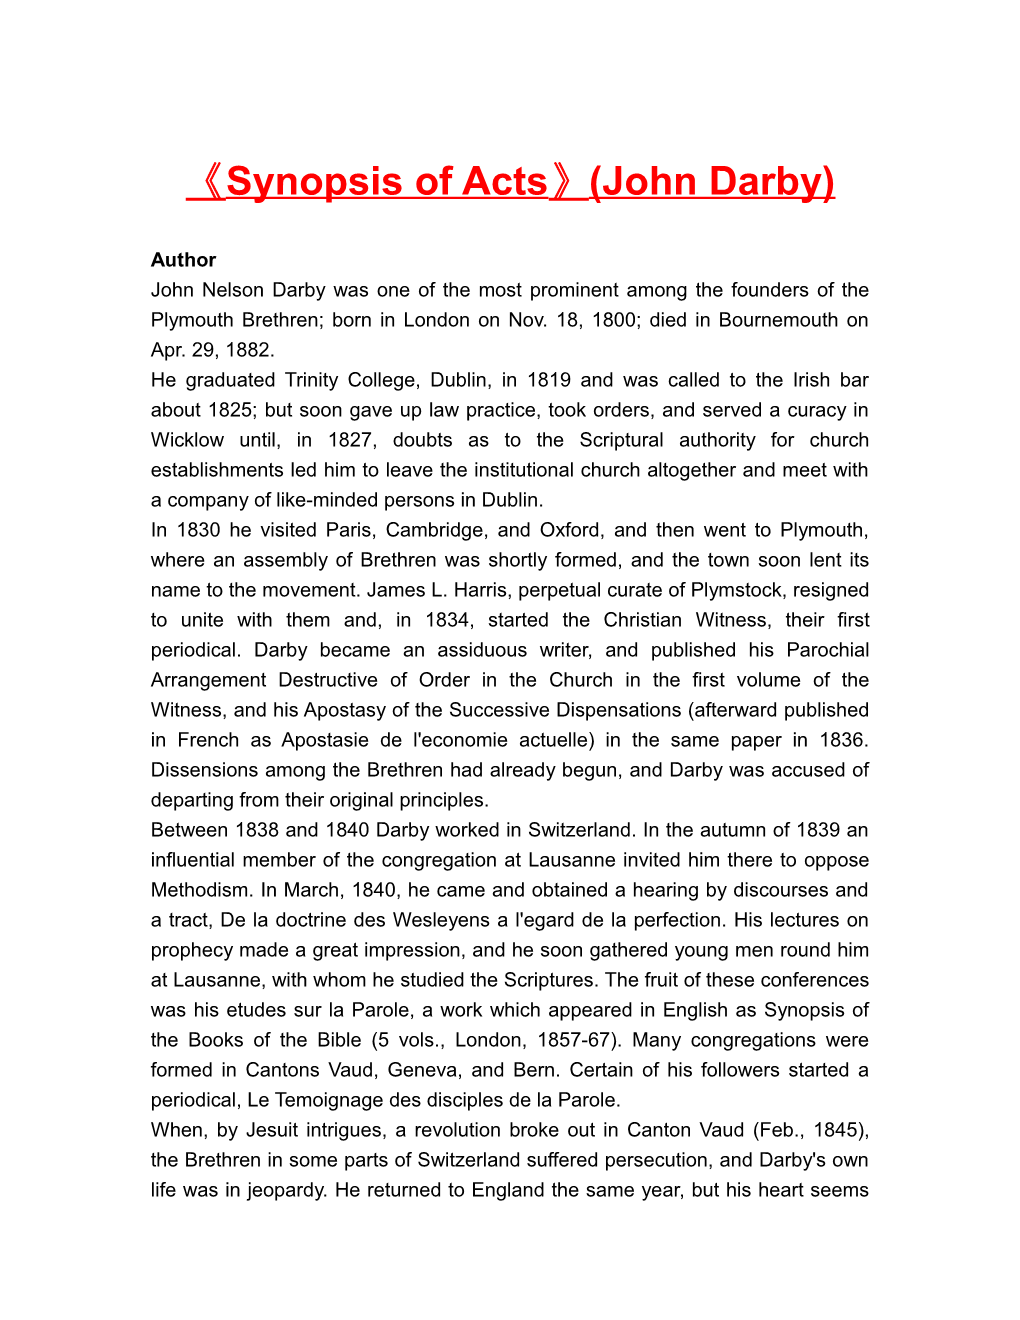 Synopsis of Acts (John Darby)